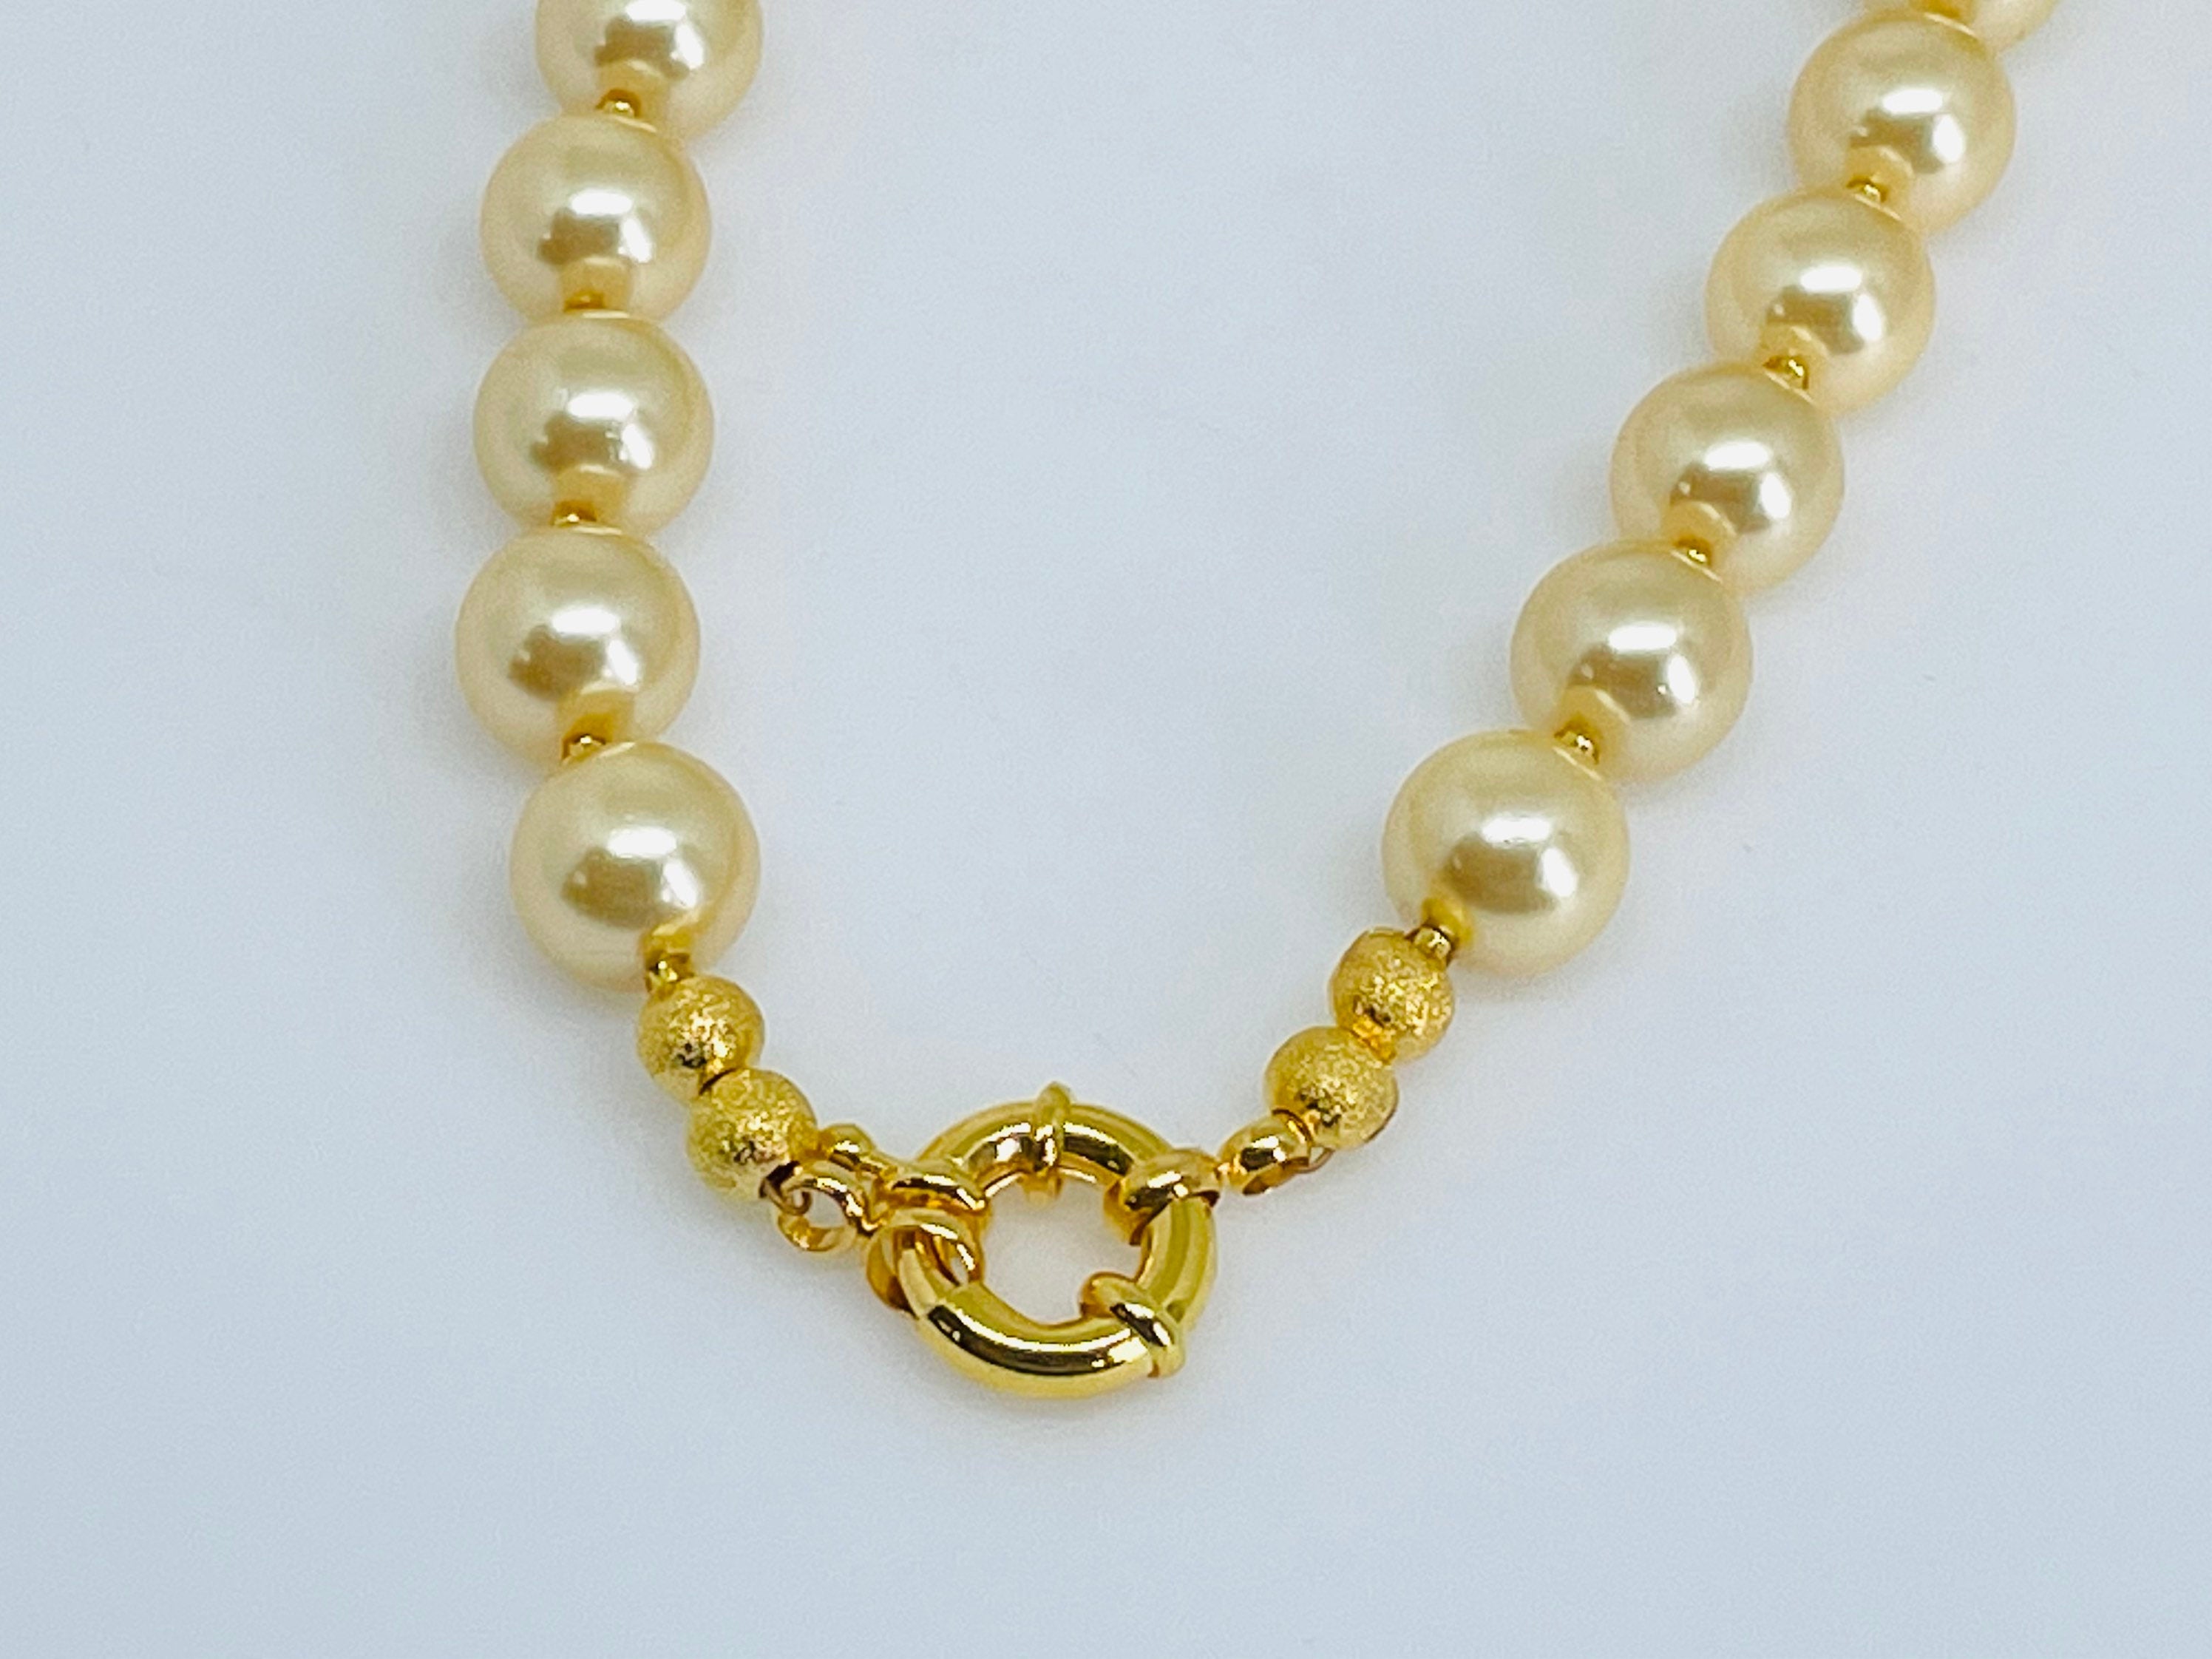 11-13mm Golden South Sea Pearl Necklace - AAAA Quality - Pure Pearls